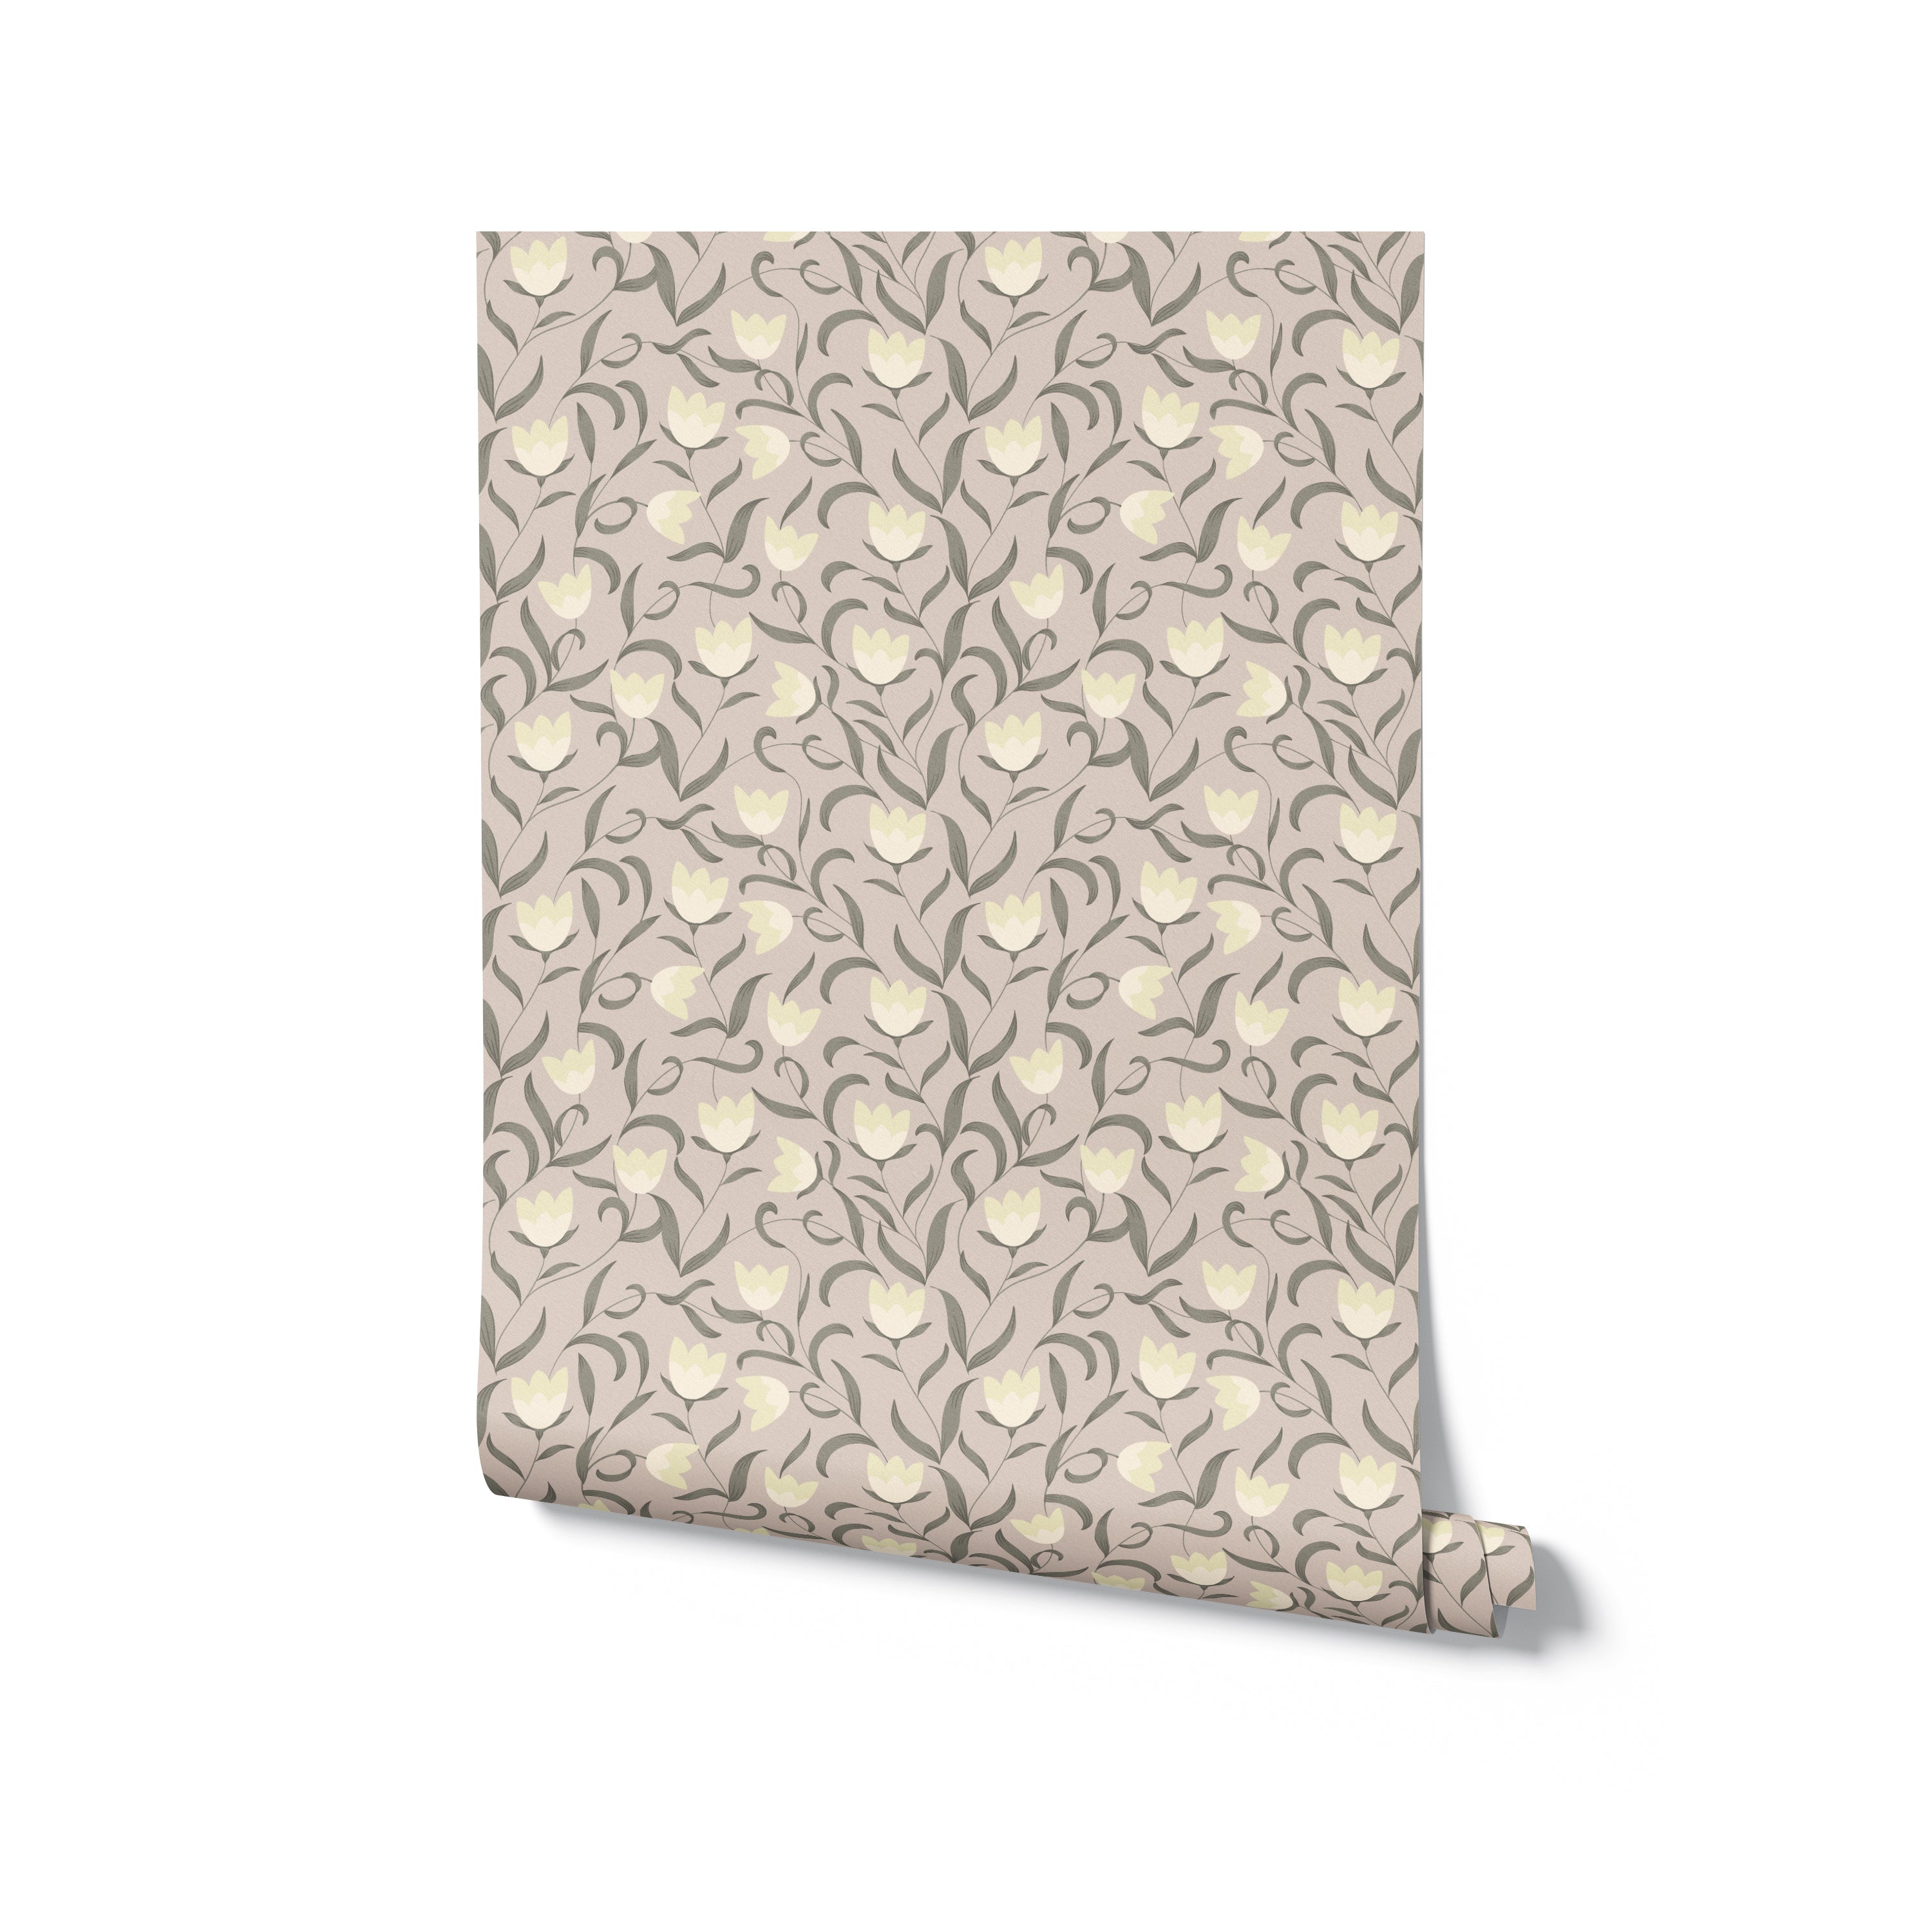 A roll of Timeless Tulips Wallpaper, displaying its sophisticated pattern of tulips and flowing leaves in muted beige and green shades, perfect for adding a touch of classic elegance to any room